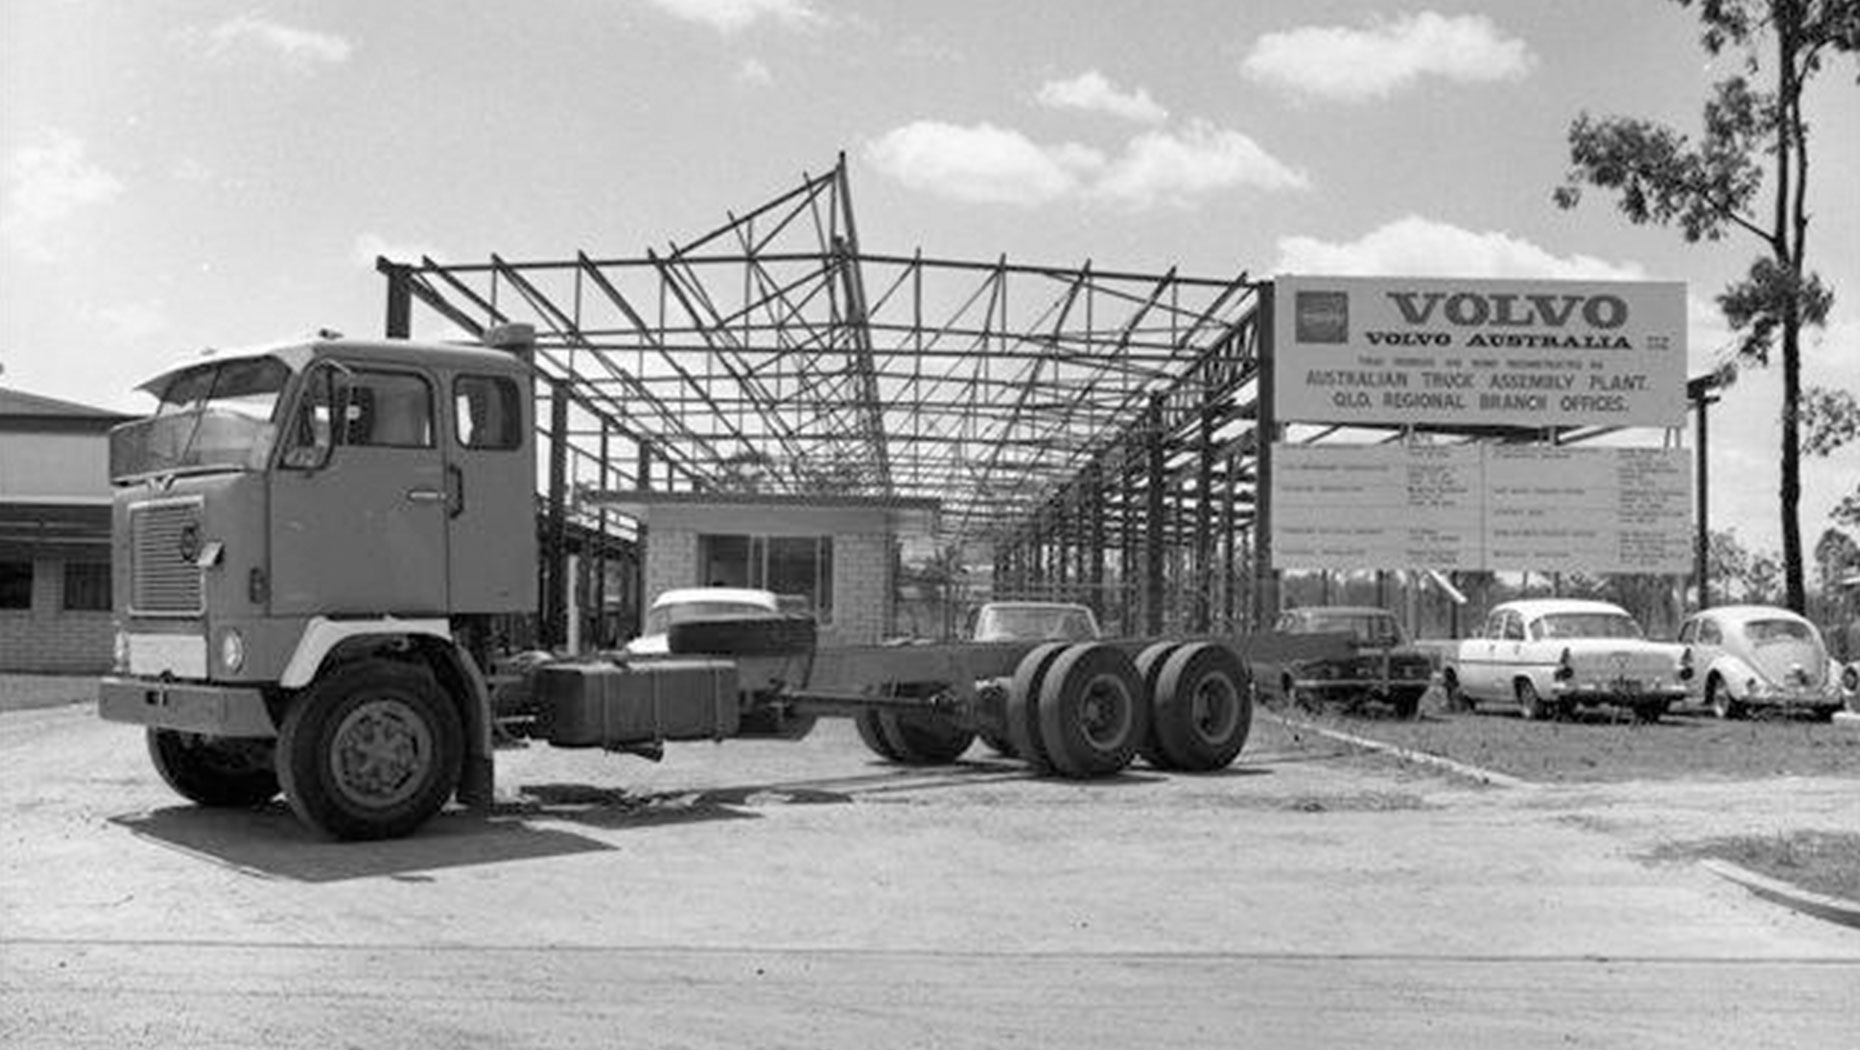 https://www.volvogroup.com/content/dam/volvo-group/markets/master/about-us/organization/our-production-facilities/wacol/1860x1050-history-wacol-site-image.jpg